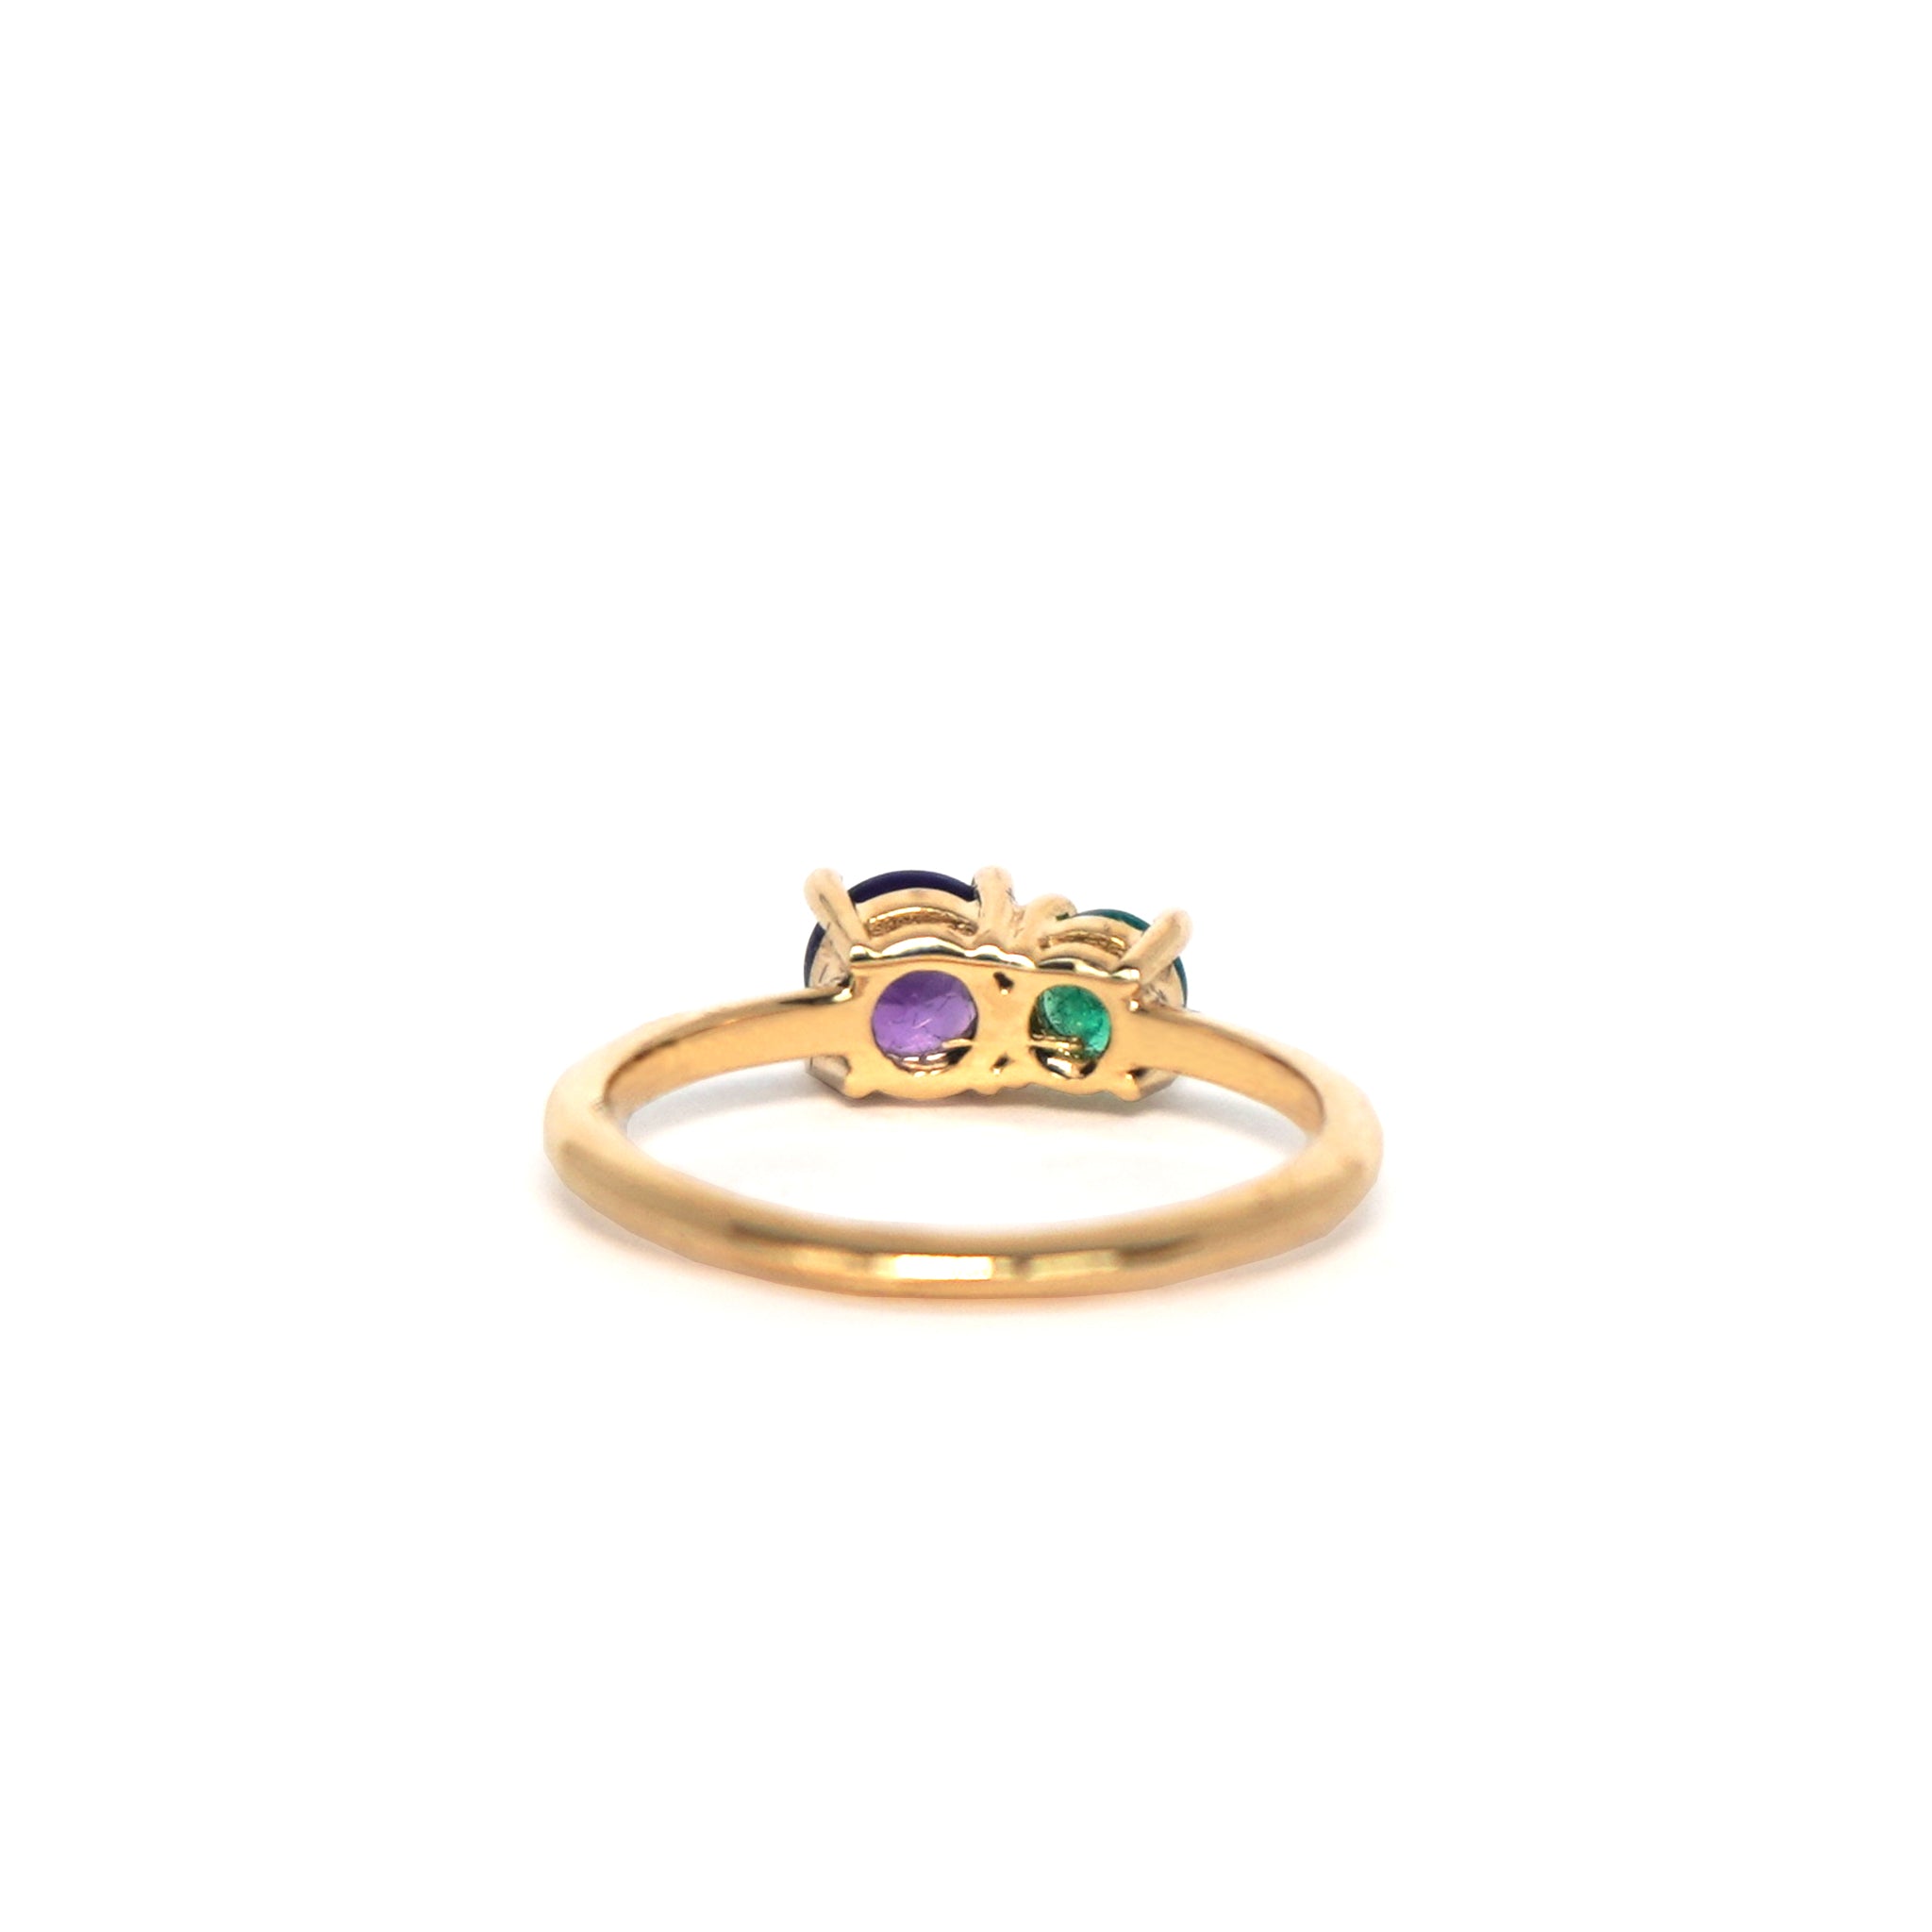 Back view of Lico Jewelry's Beetle Grape ring in solid 14k yellow gold with amethyst and Colombian emerald stones